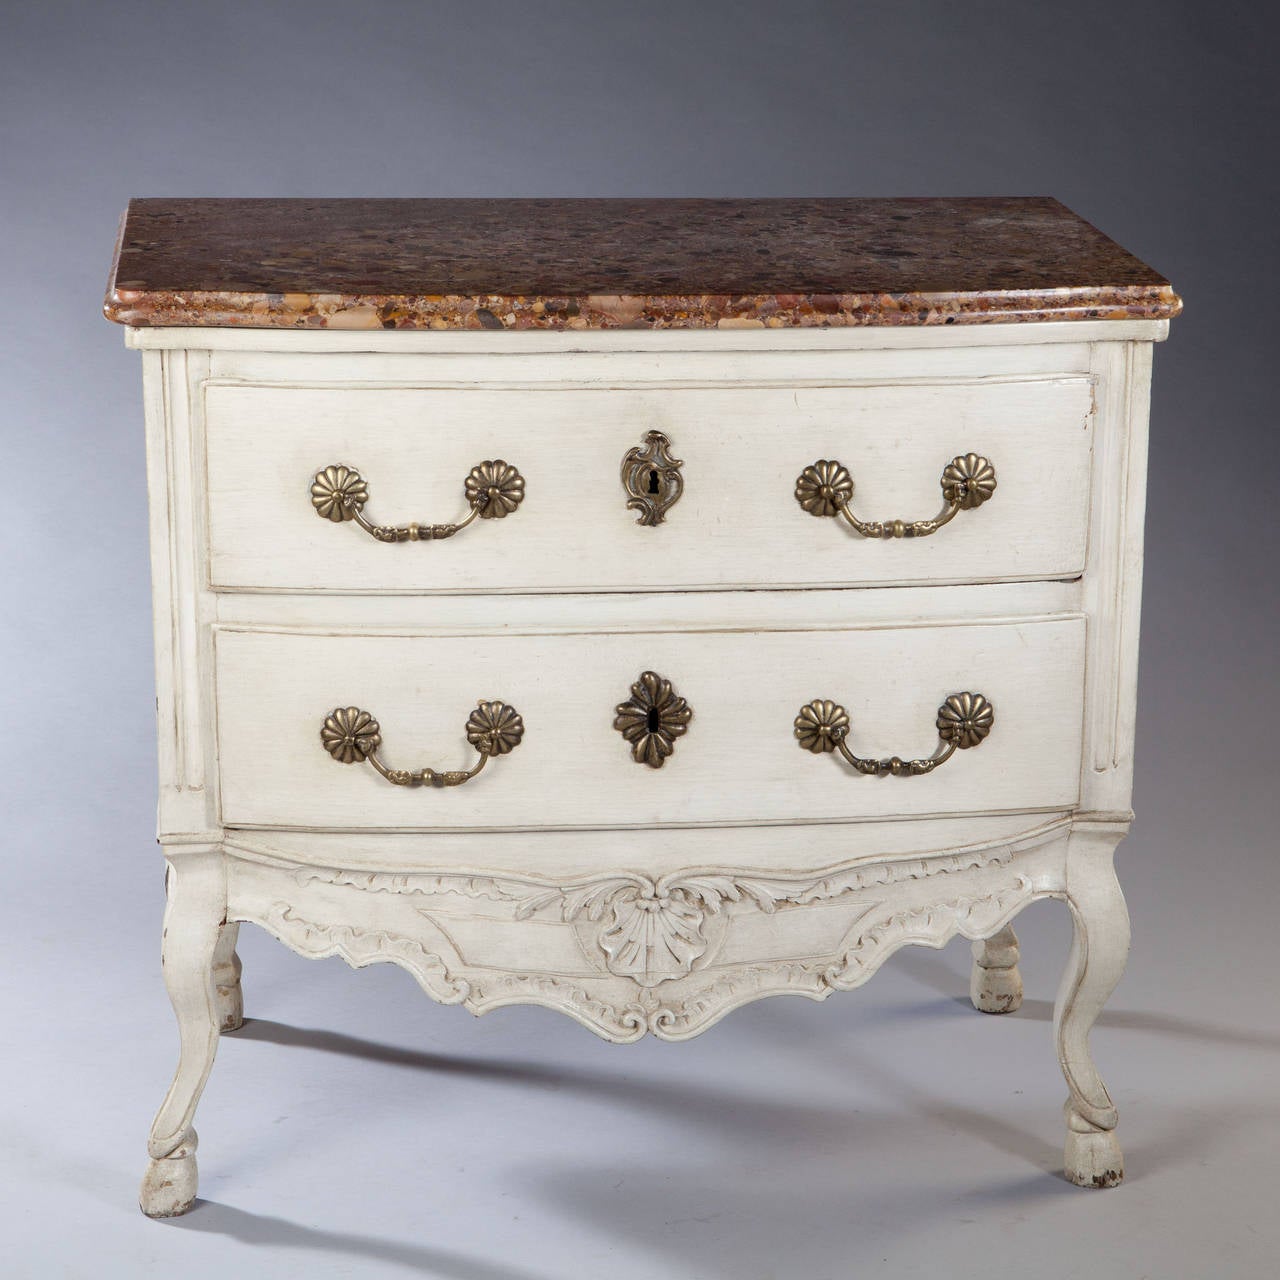 A fine early 18th century French Commode with breche d'alep marble top above two long drawers supported on cabriol legs, the front with a carved apron and central shell motif. The sides also decorated with recessed moldings and sweeping apron. The